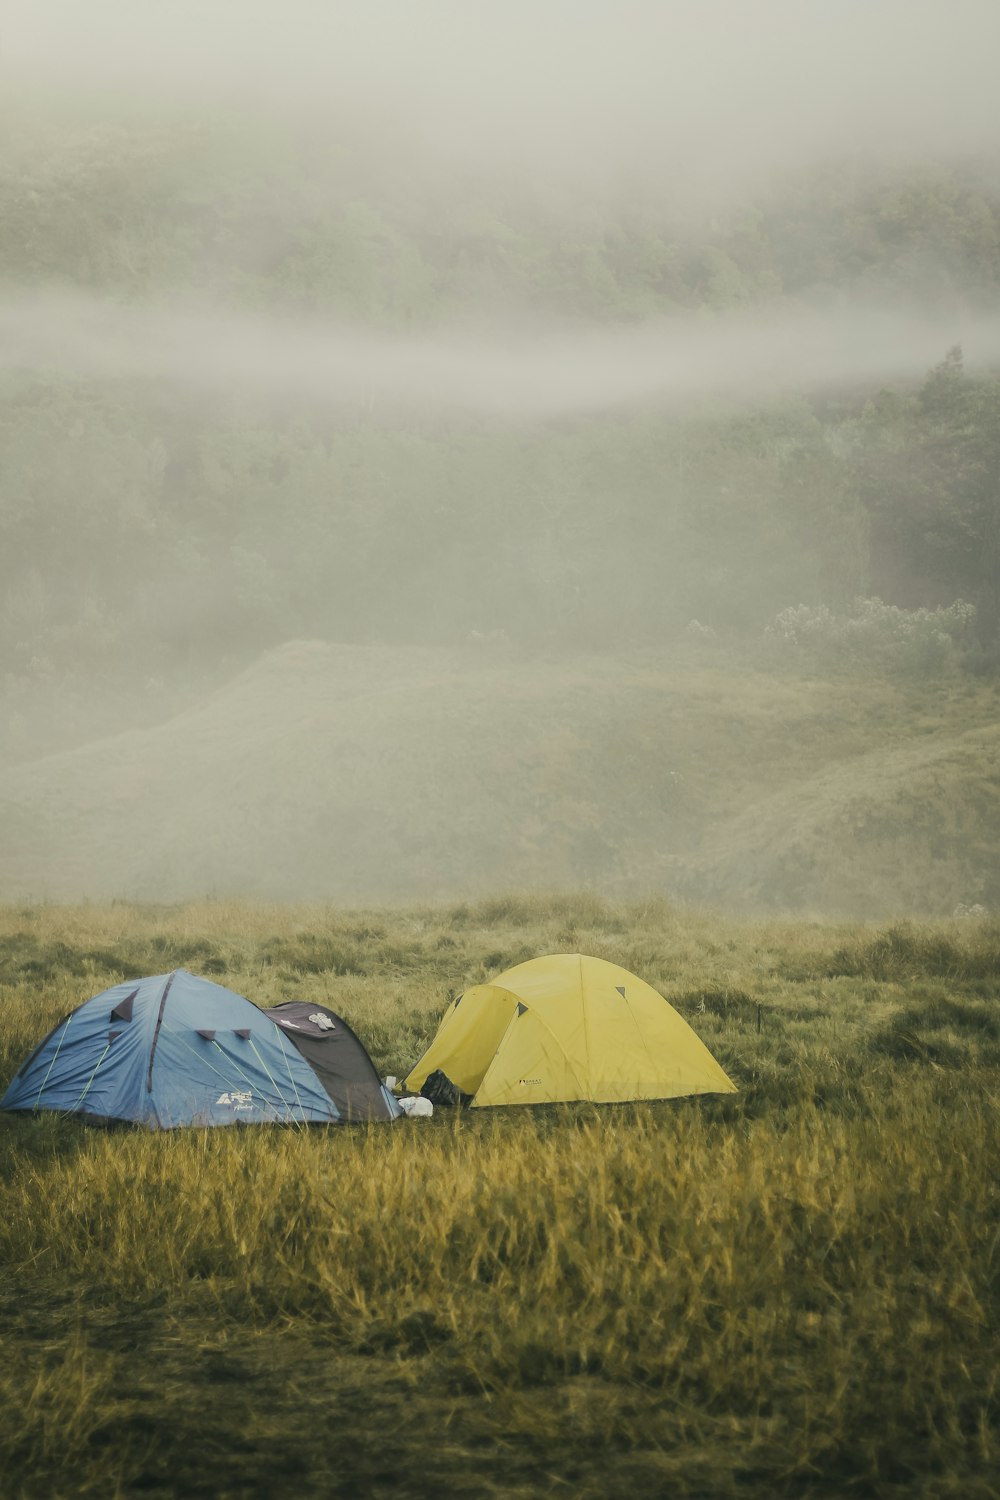 white dome tent on green grass field during foggy weather